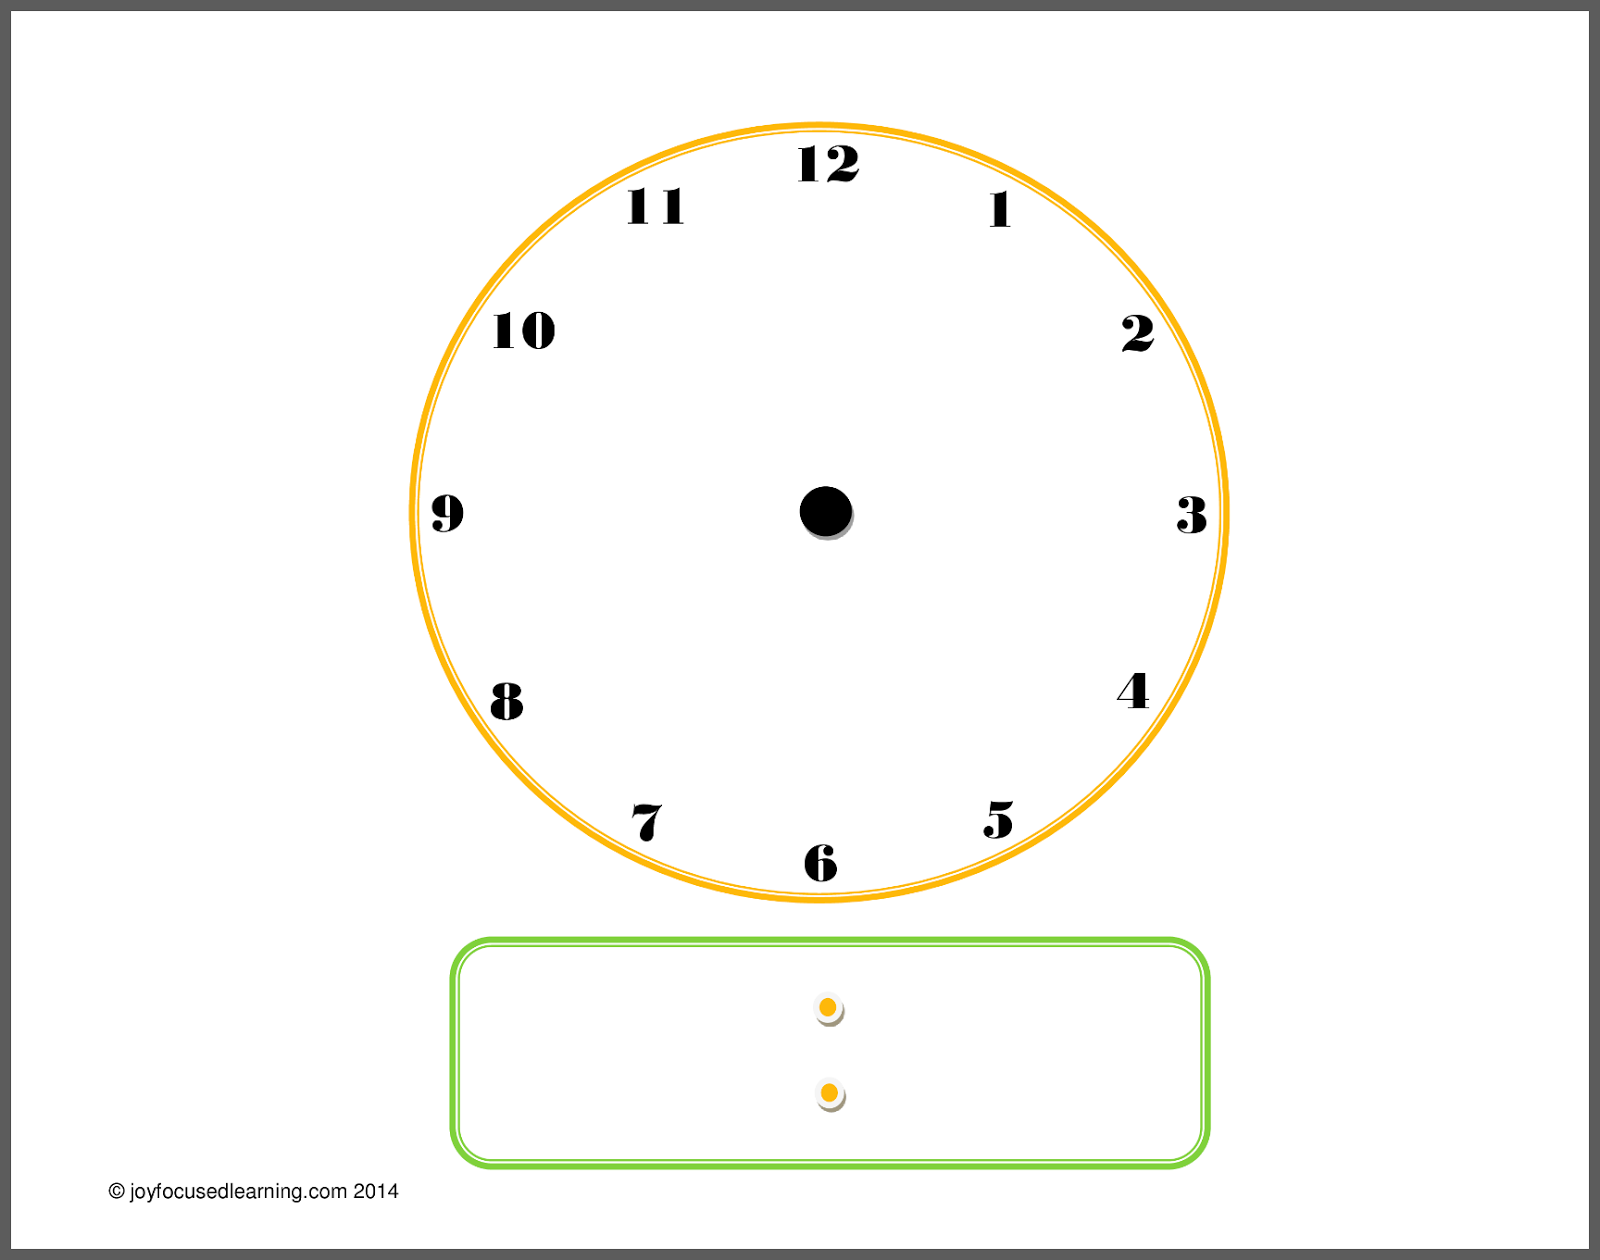 Blank Digital Clock Faces - A Useful Resource for Time-Keeping and Design